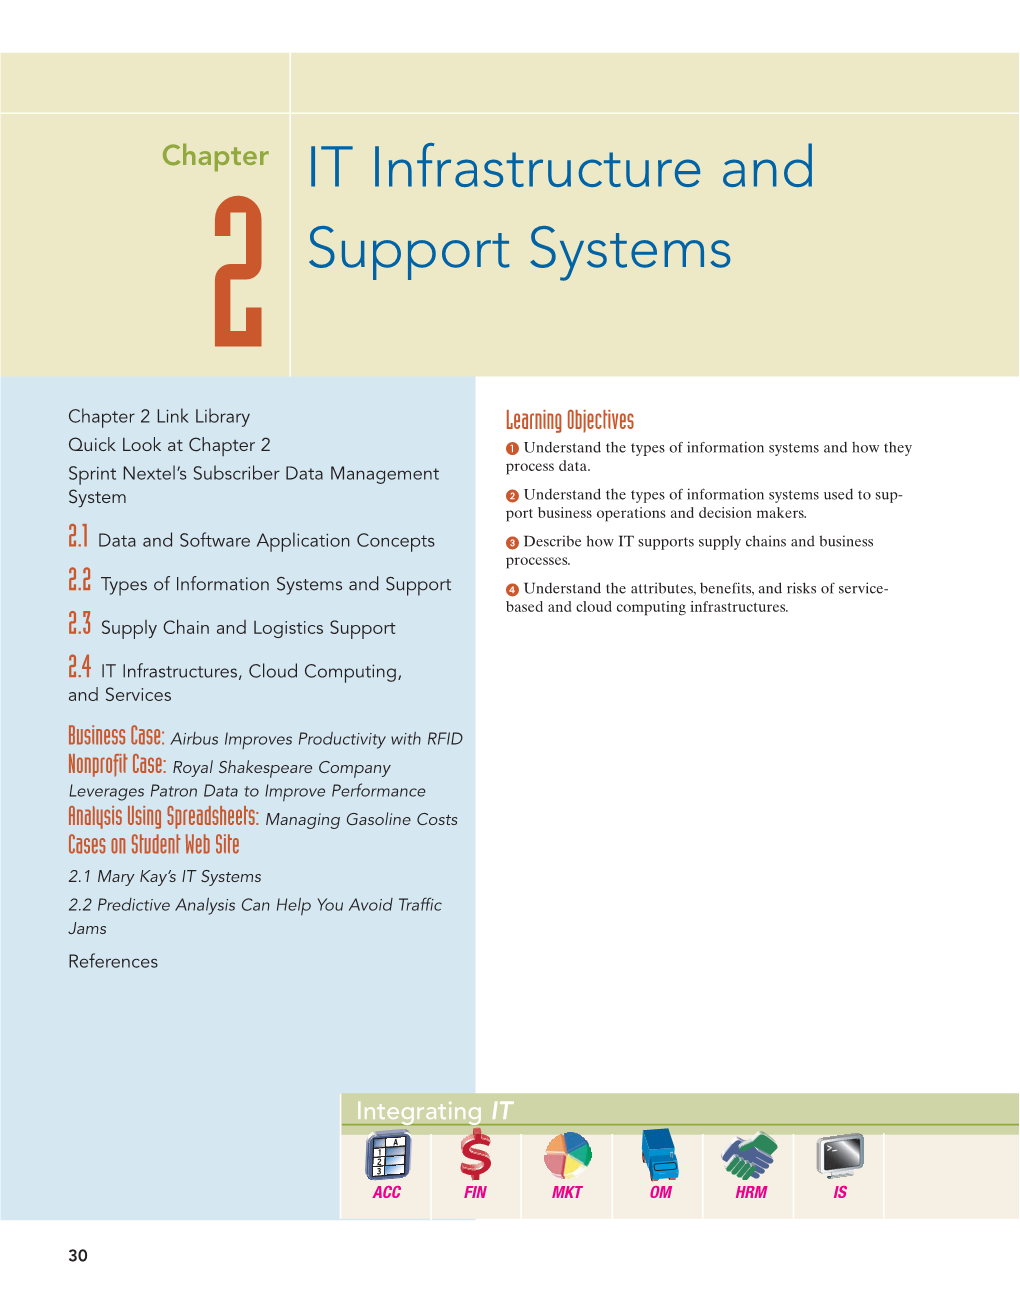 IT Infrastructure and Support Systems